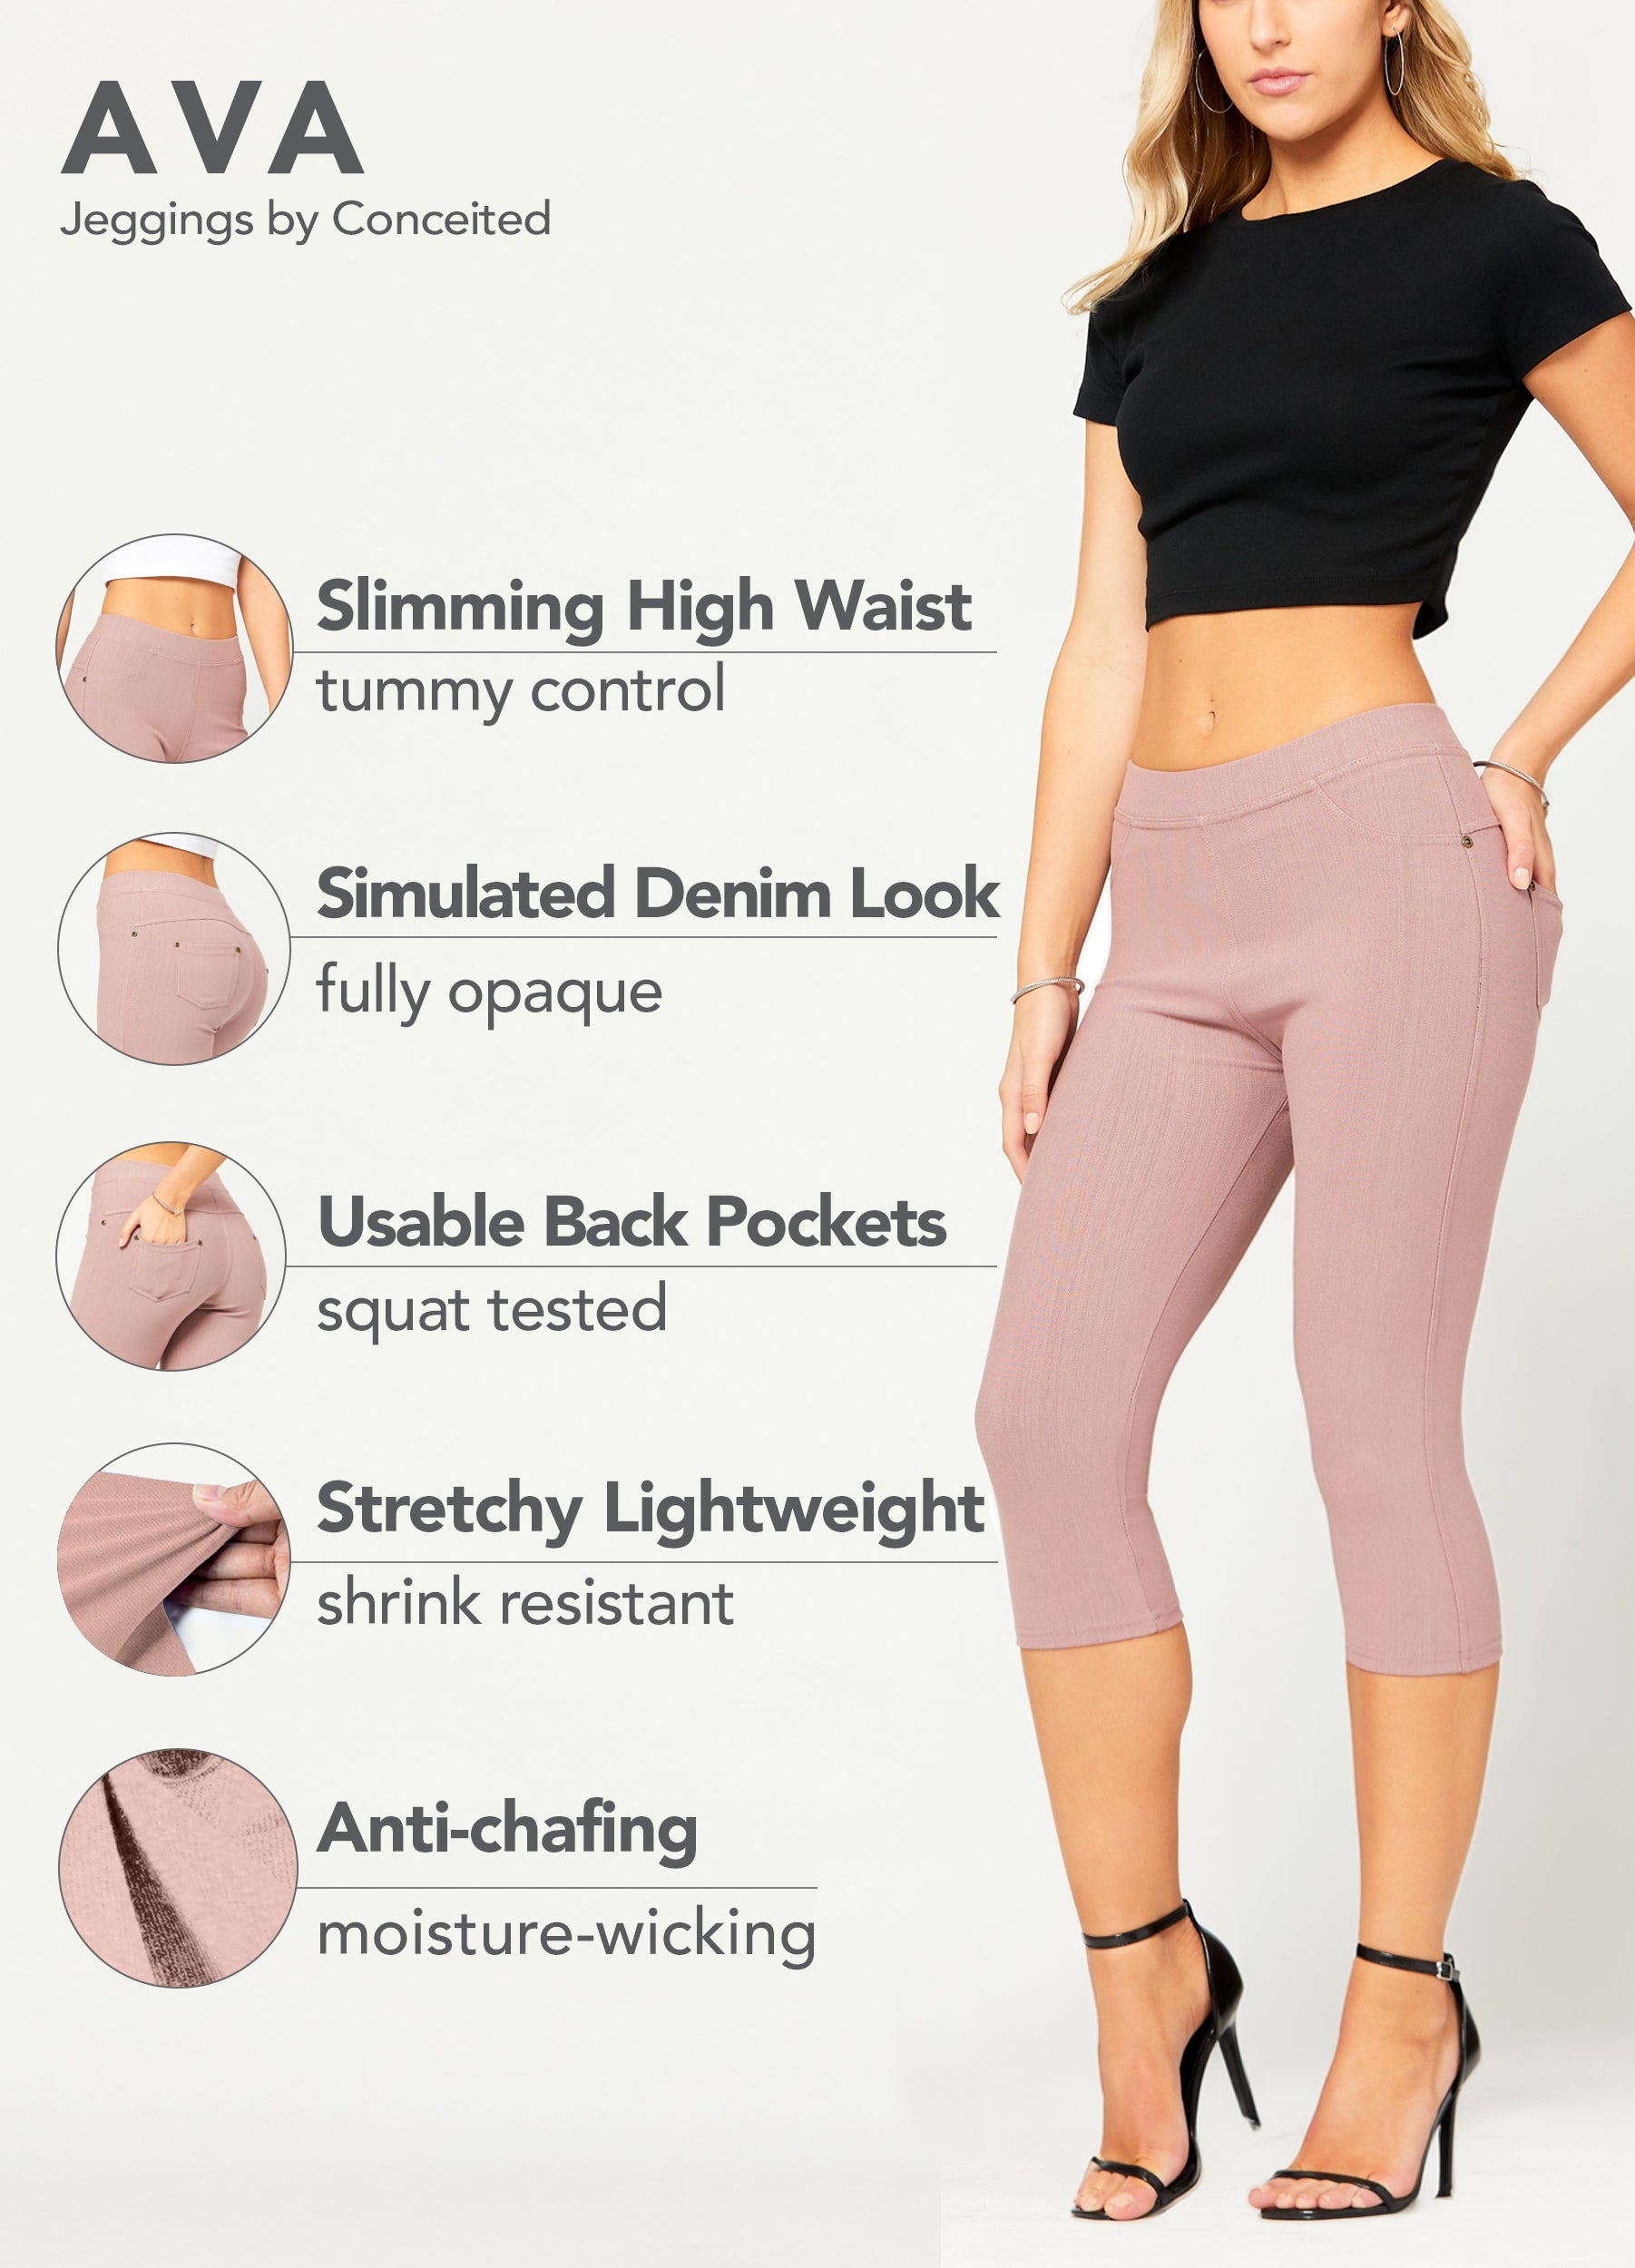 Women's New Mix Brand Capri Jeggings. - 1 Elastic Waistband - Pull-On  Styling - Two Functional Back Pockets - Soft, Smooth & Stretch Material - ONE  SIZE FITS MOST 0-14 - Inseam